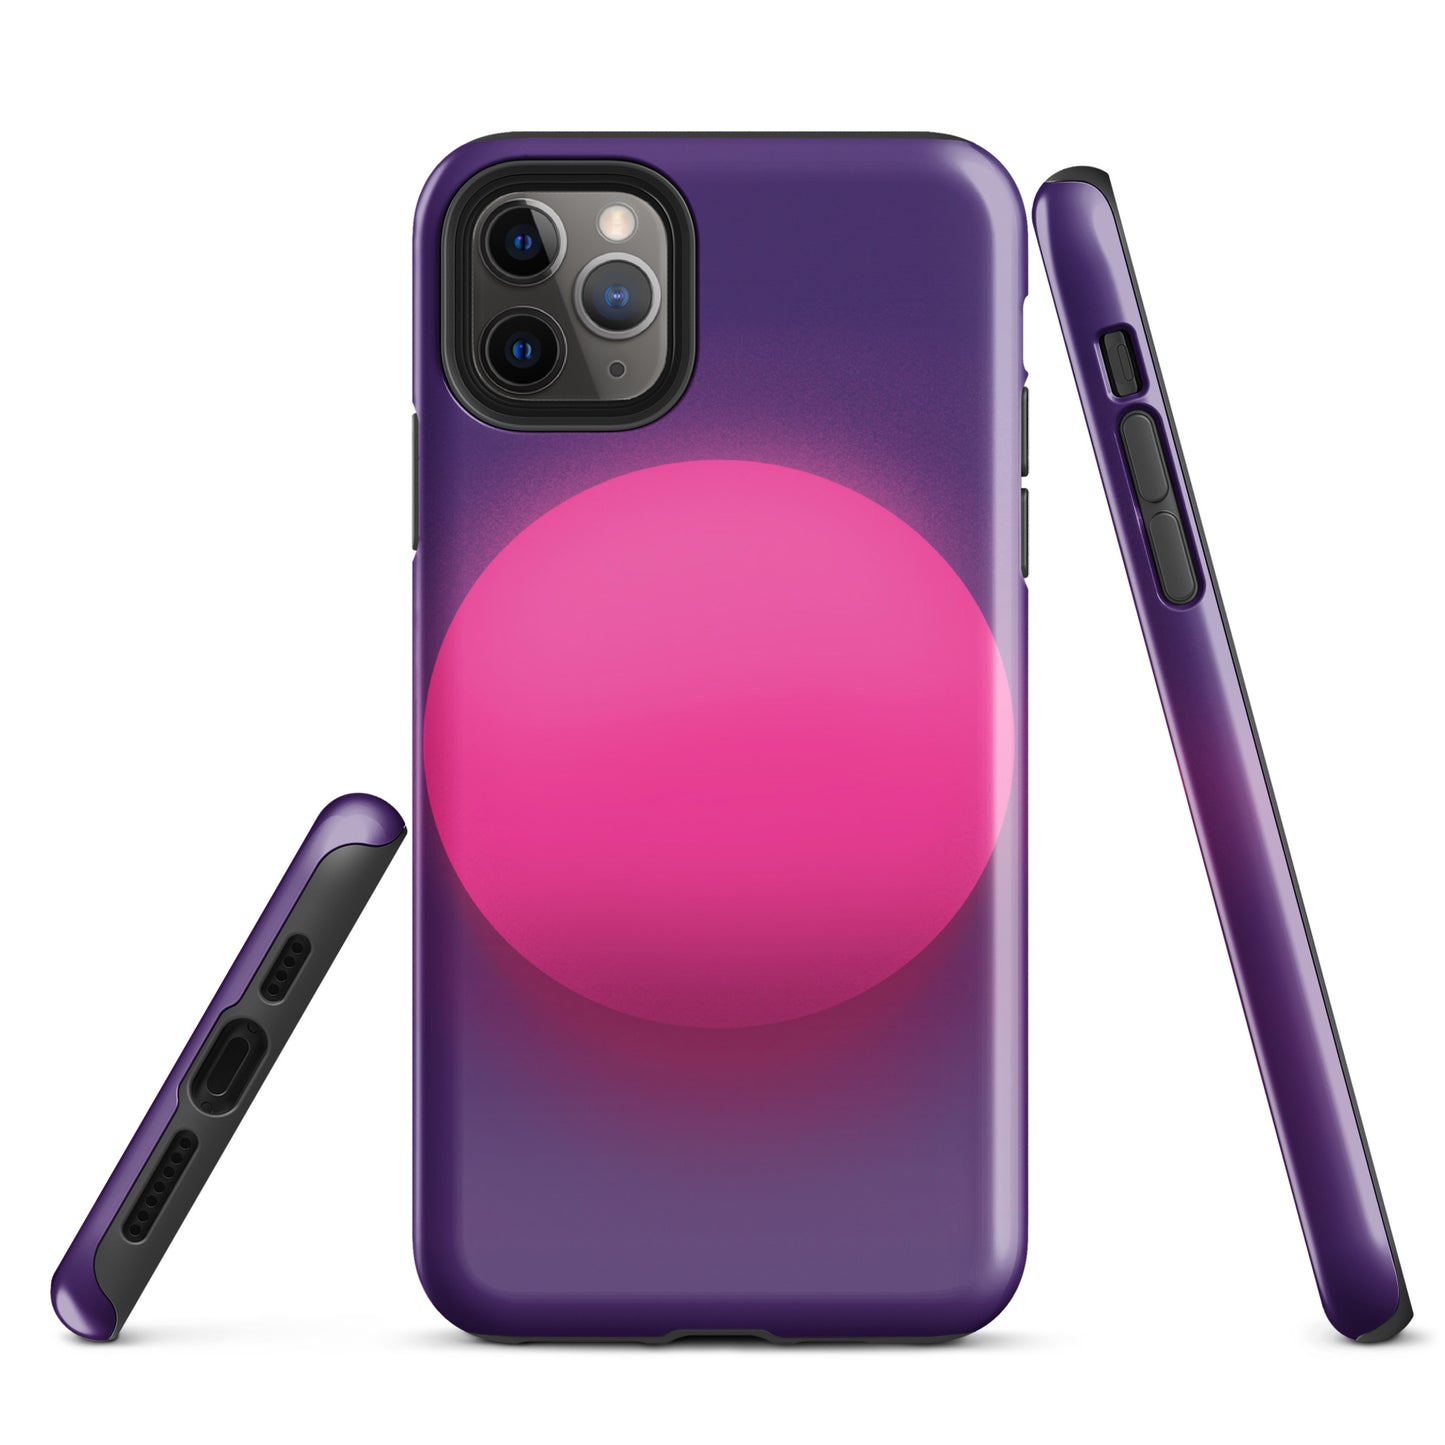 A Purple Glowing Circle Case for the iPhone 11 Pro Max